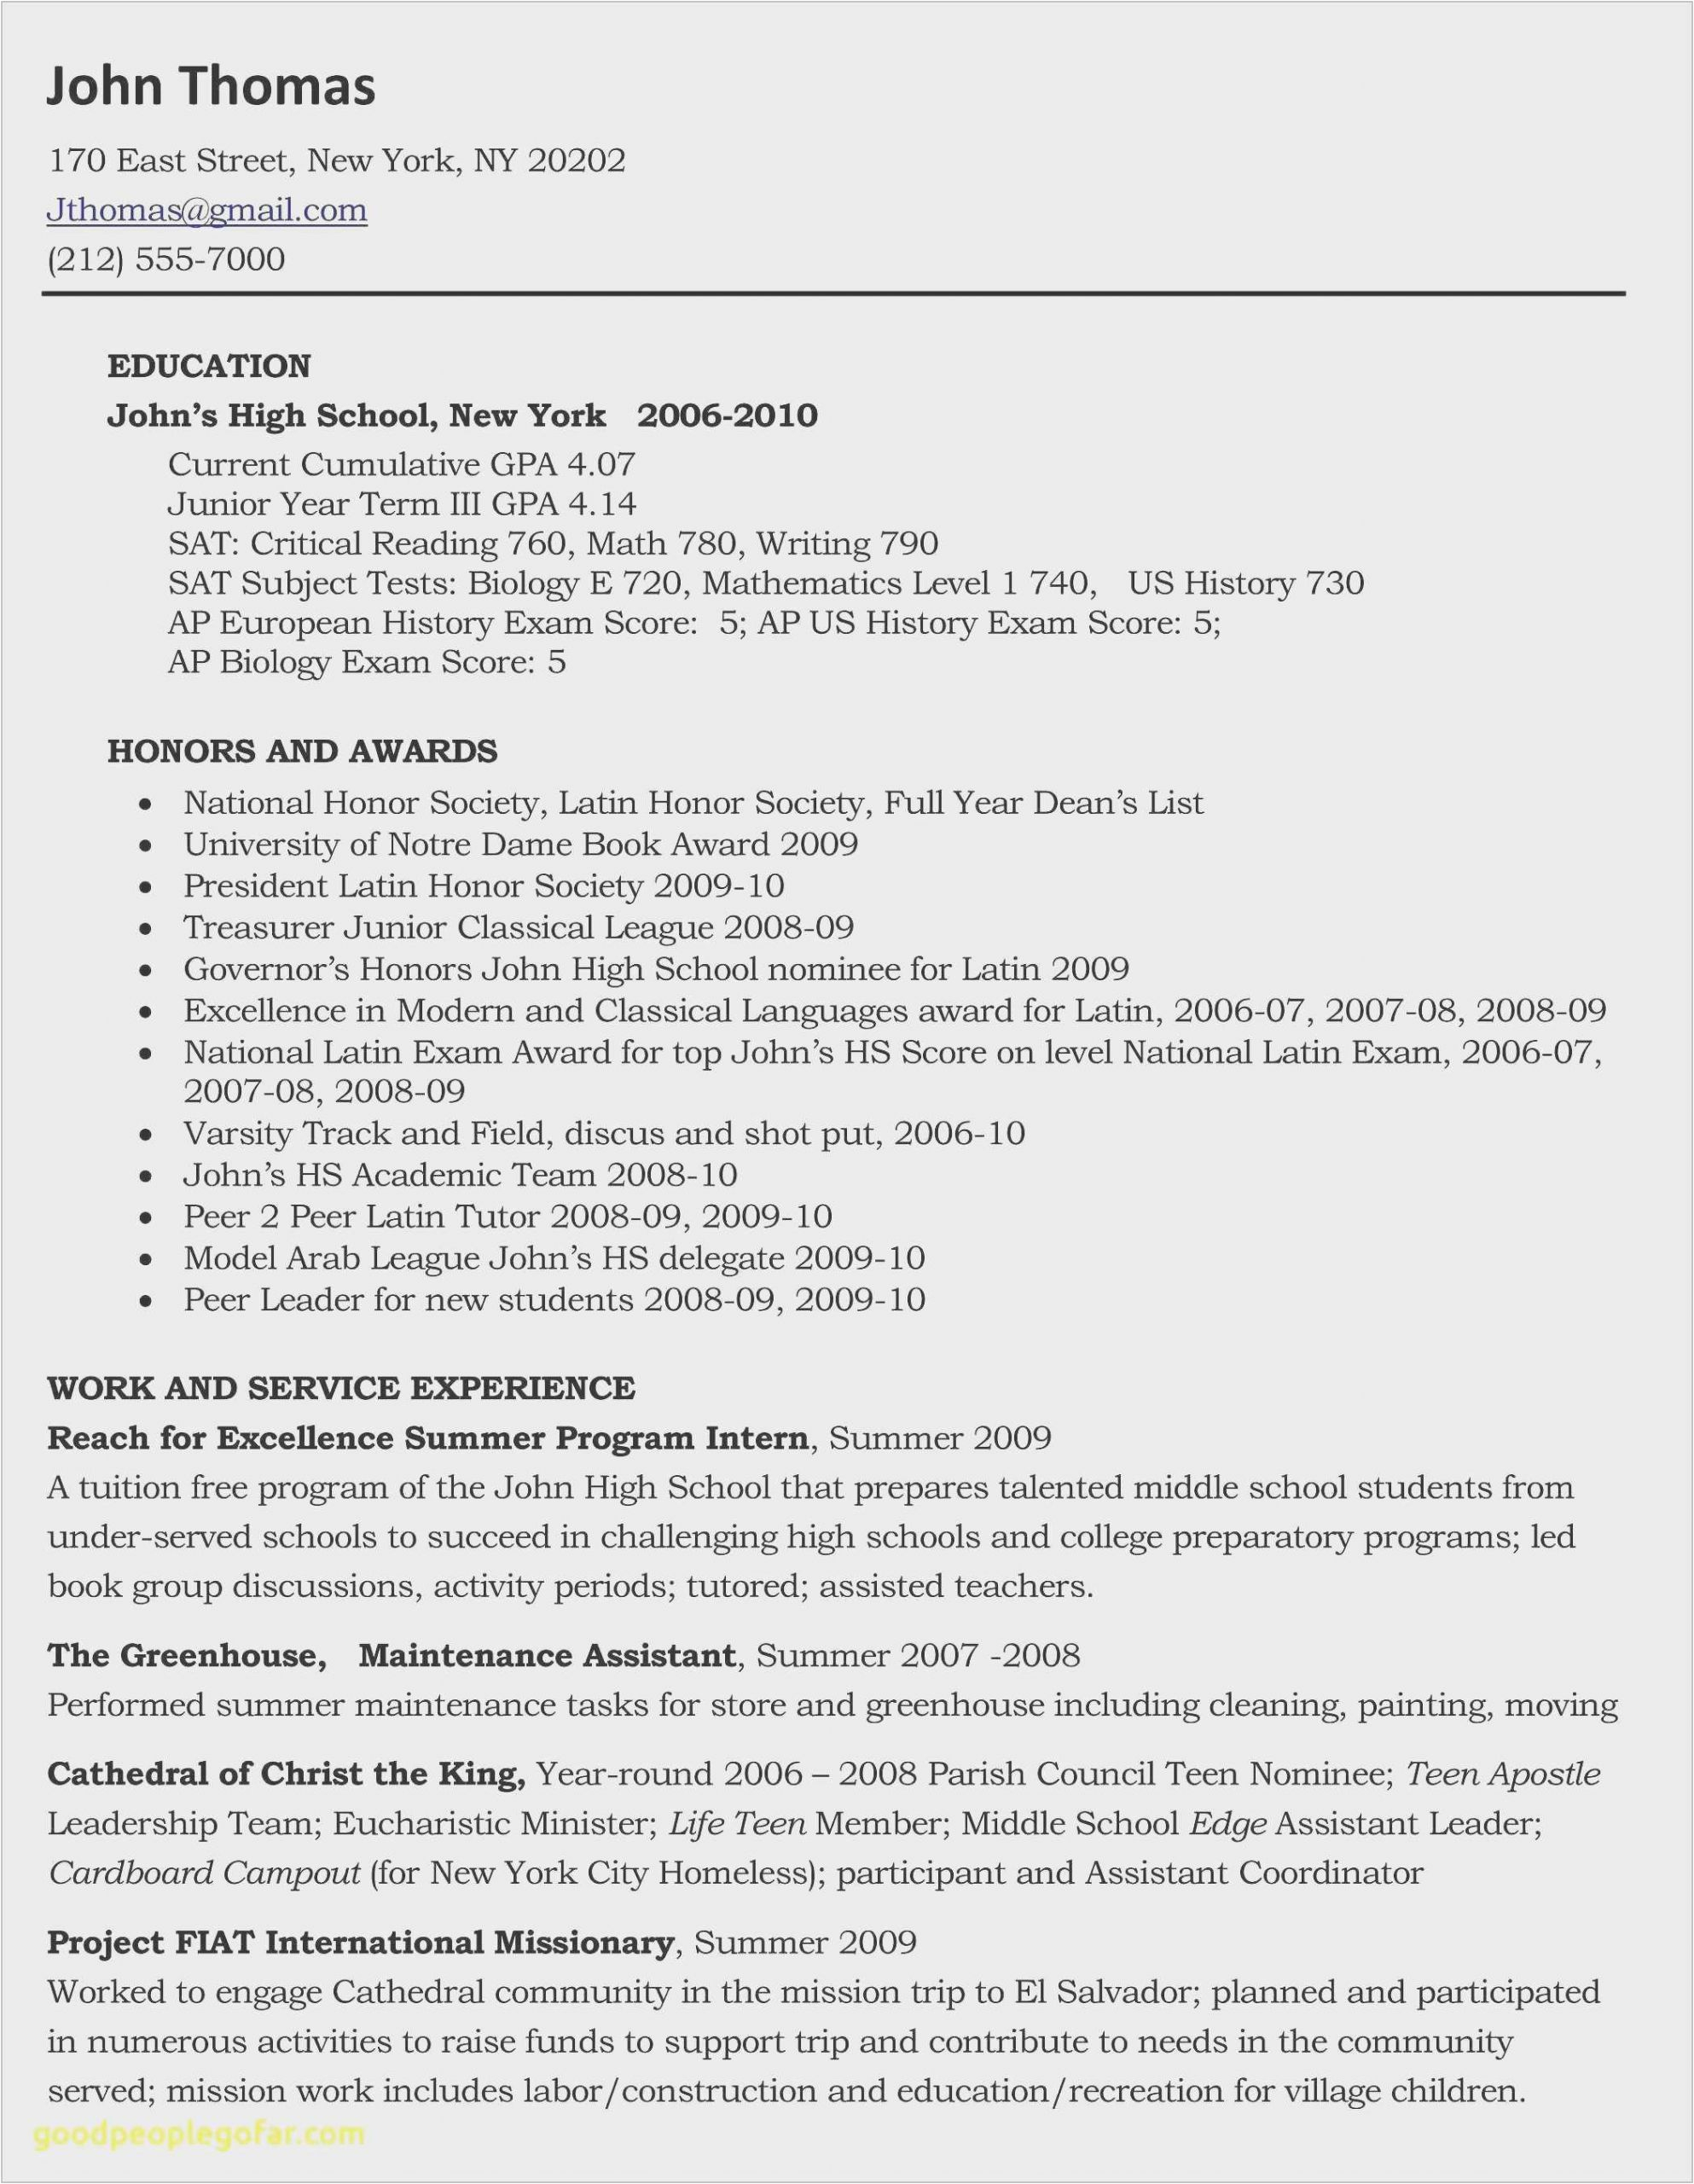 Free Resume Templates for Construction Workers Construction Resume Sample Free Collection 53 Example